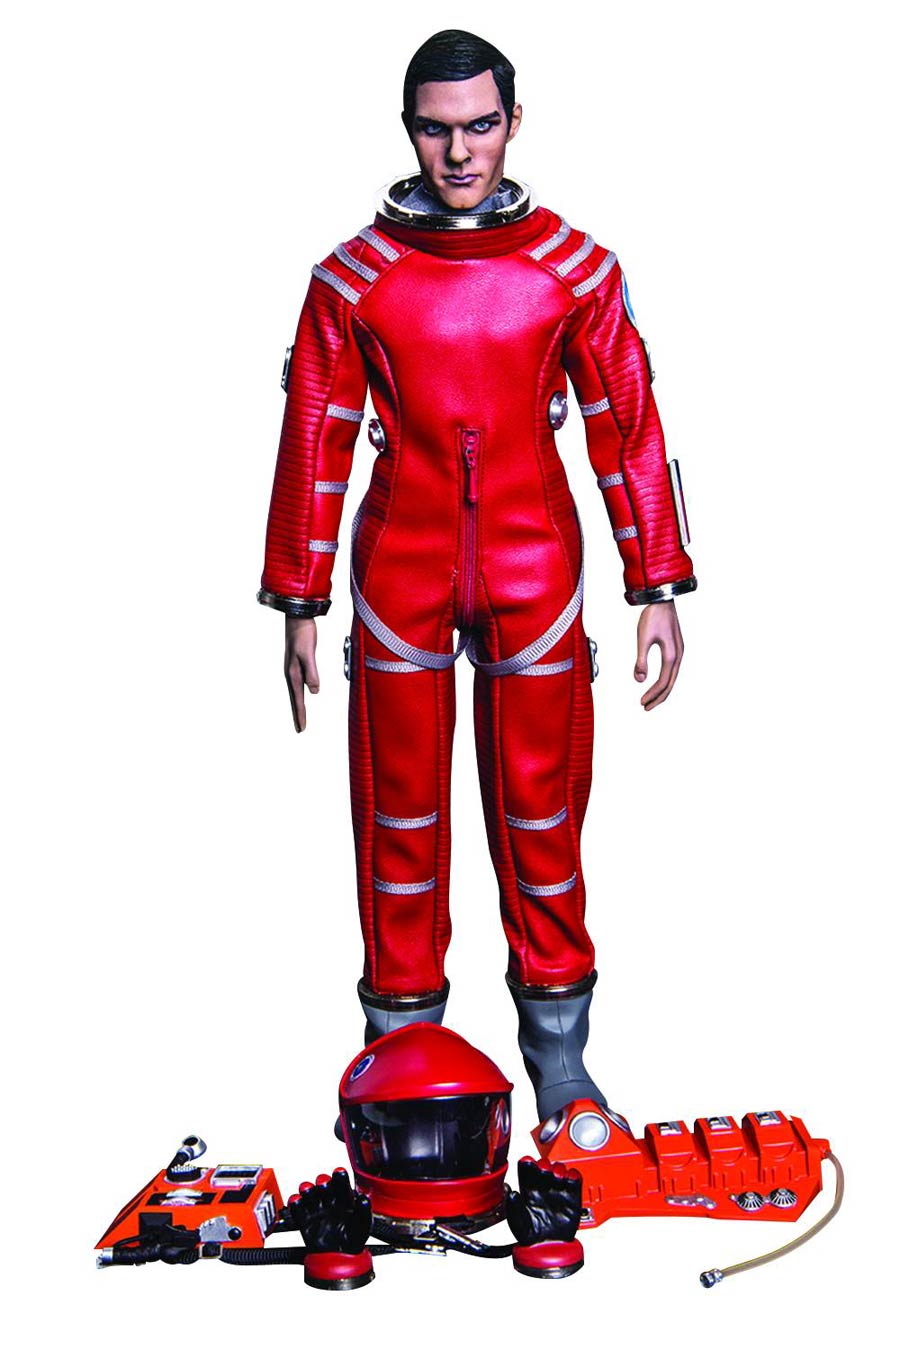 Keir Dullea 1/6 Scale Action Figure